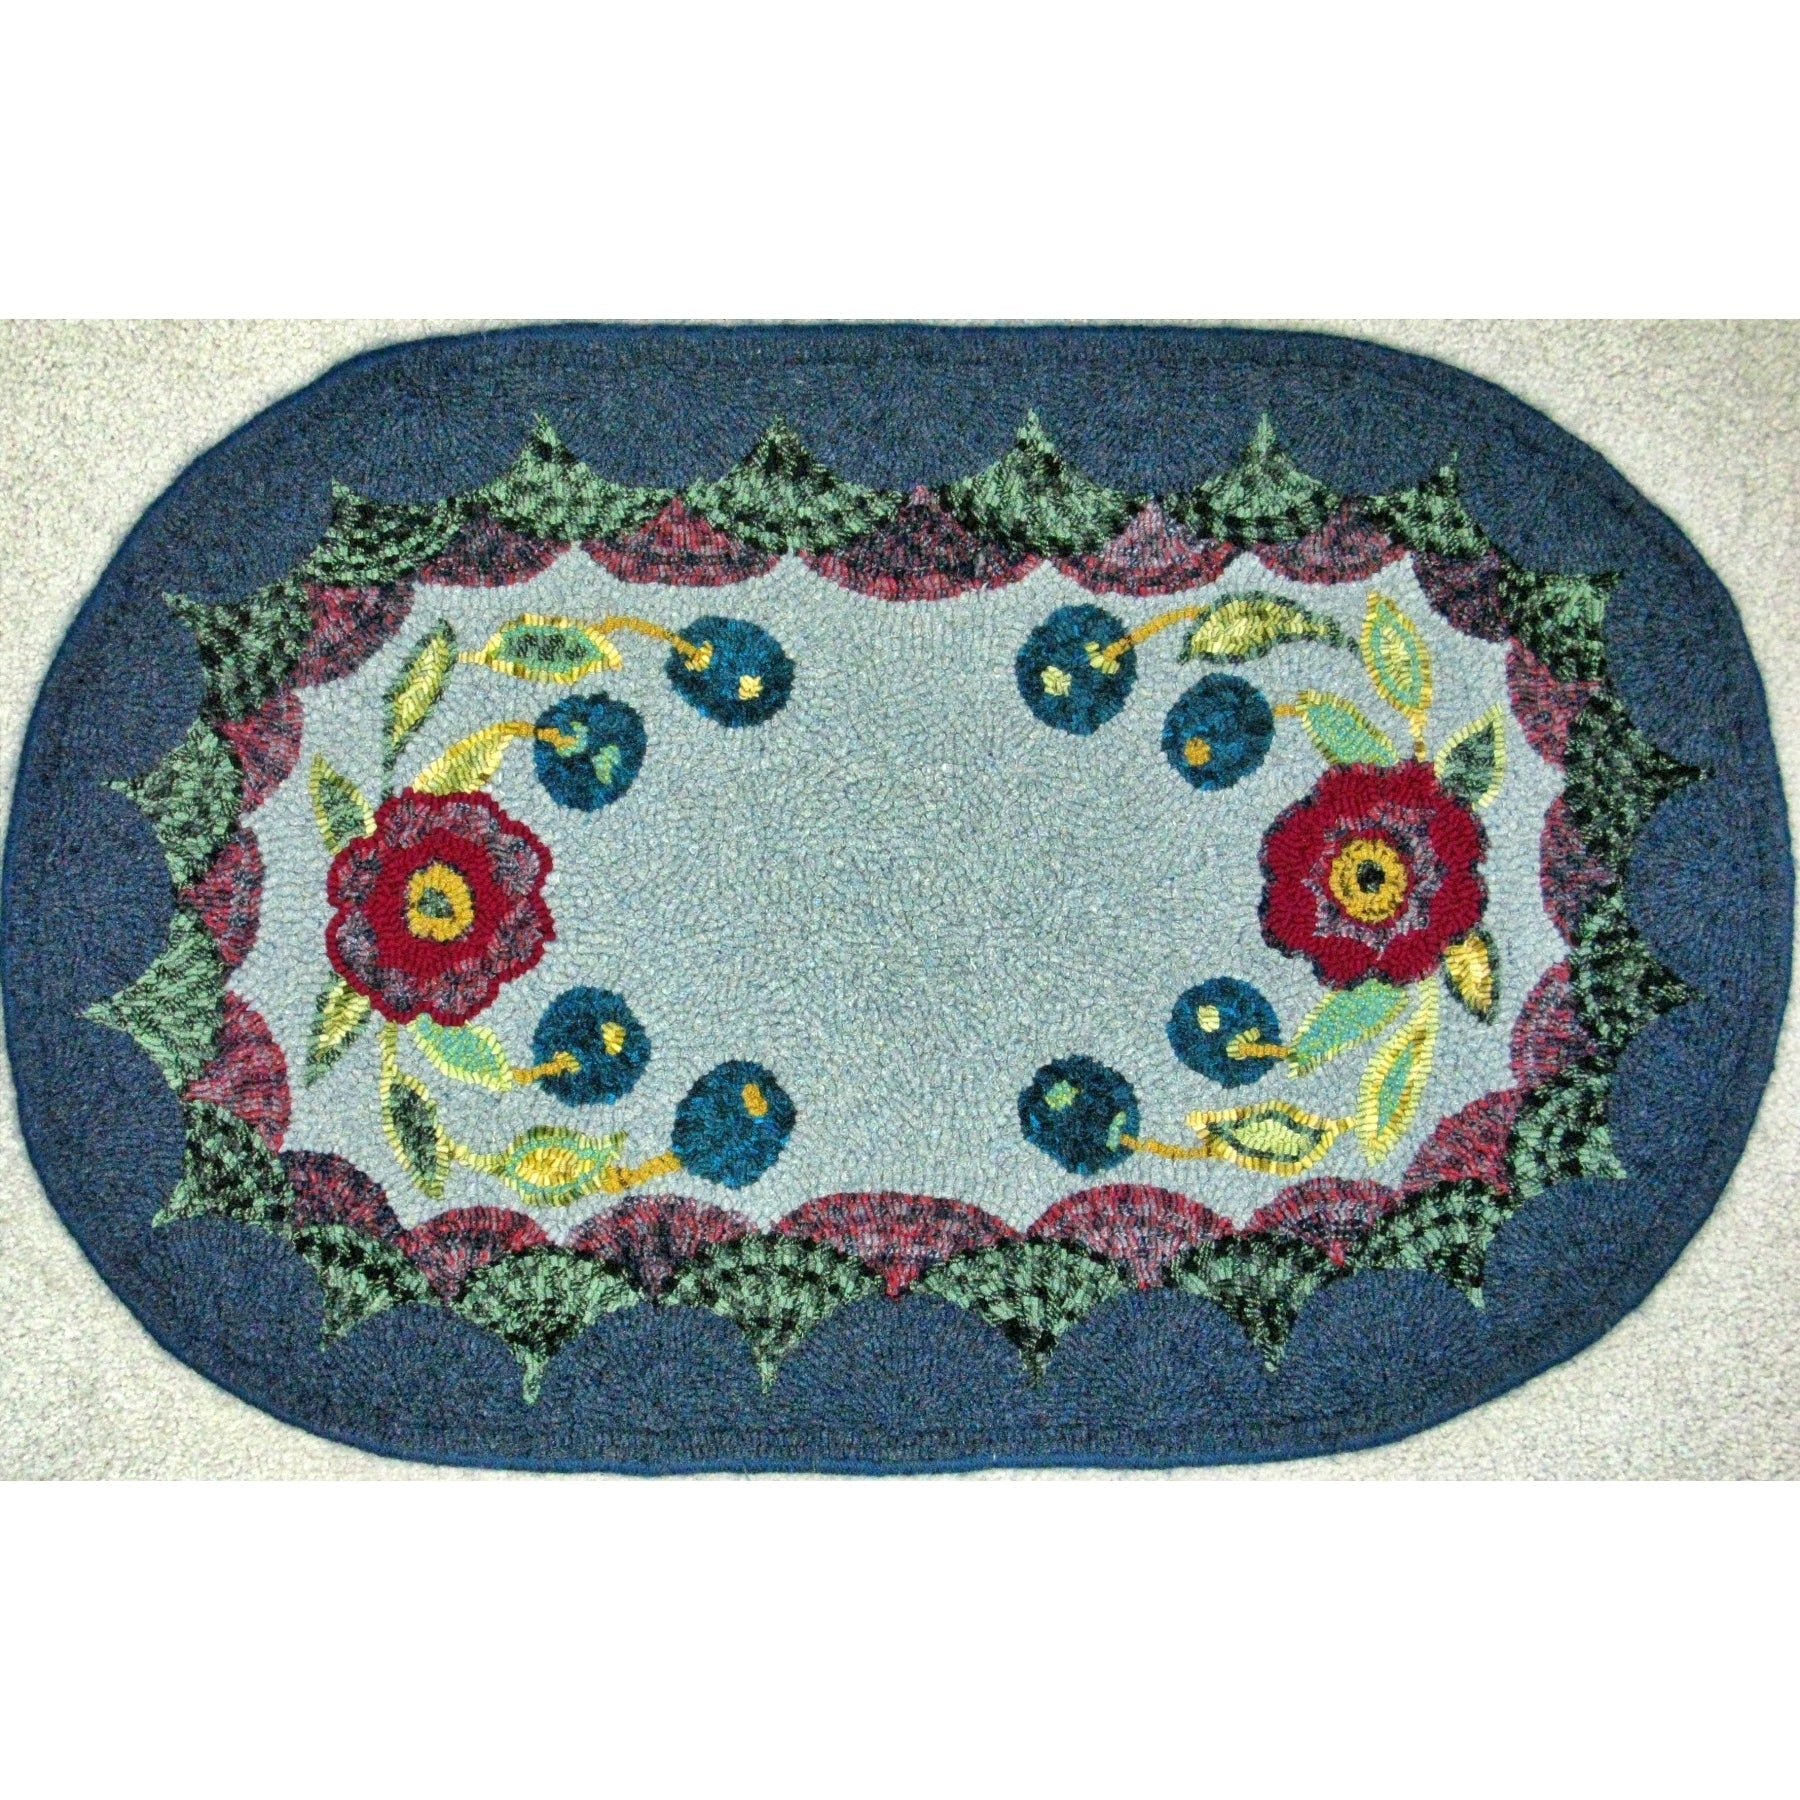 Williams Antiques, rug hooked by Linda Bell